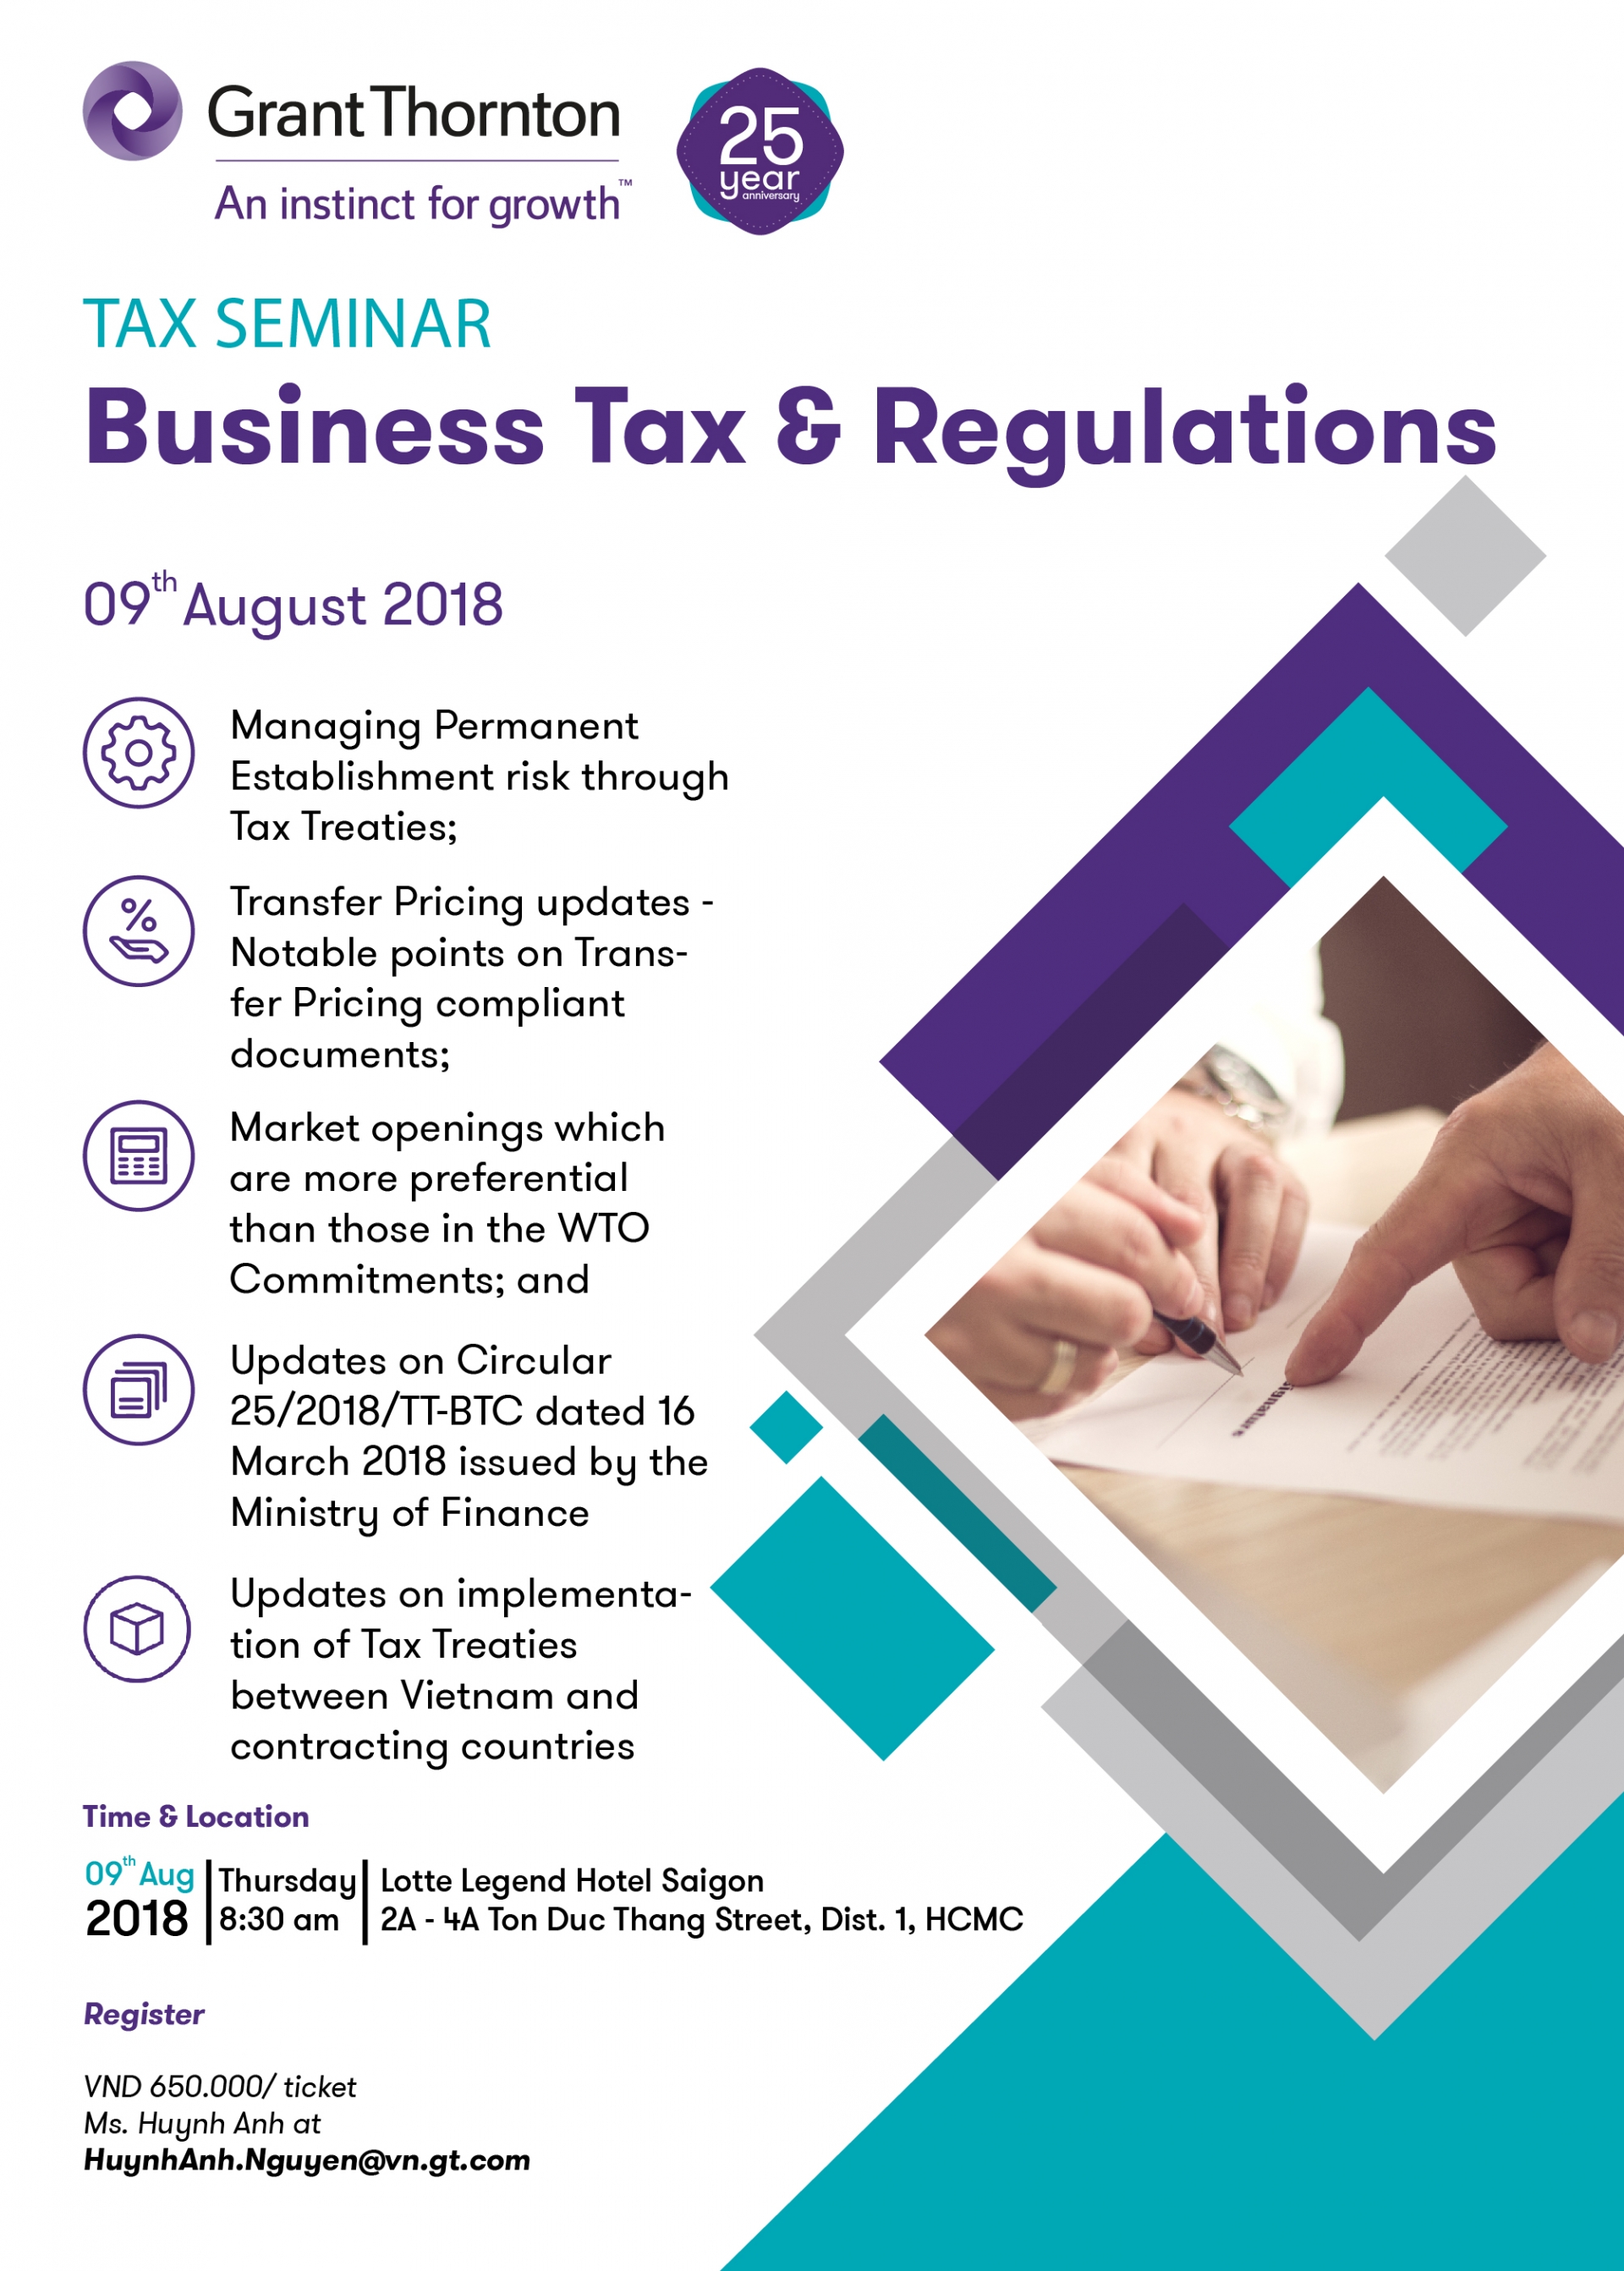 Grant Thornton to hold seminar on business tax and regulations